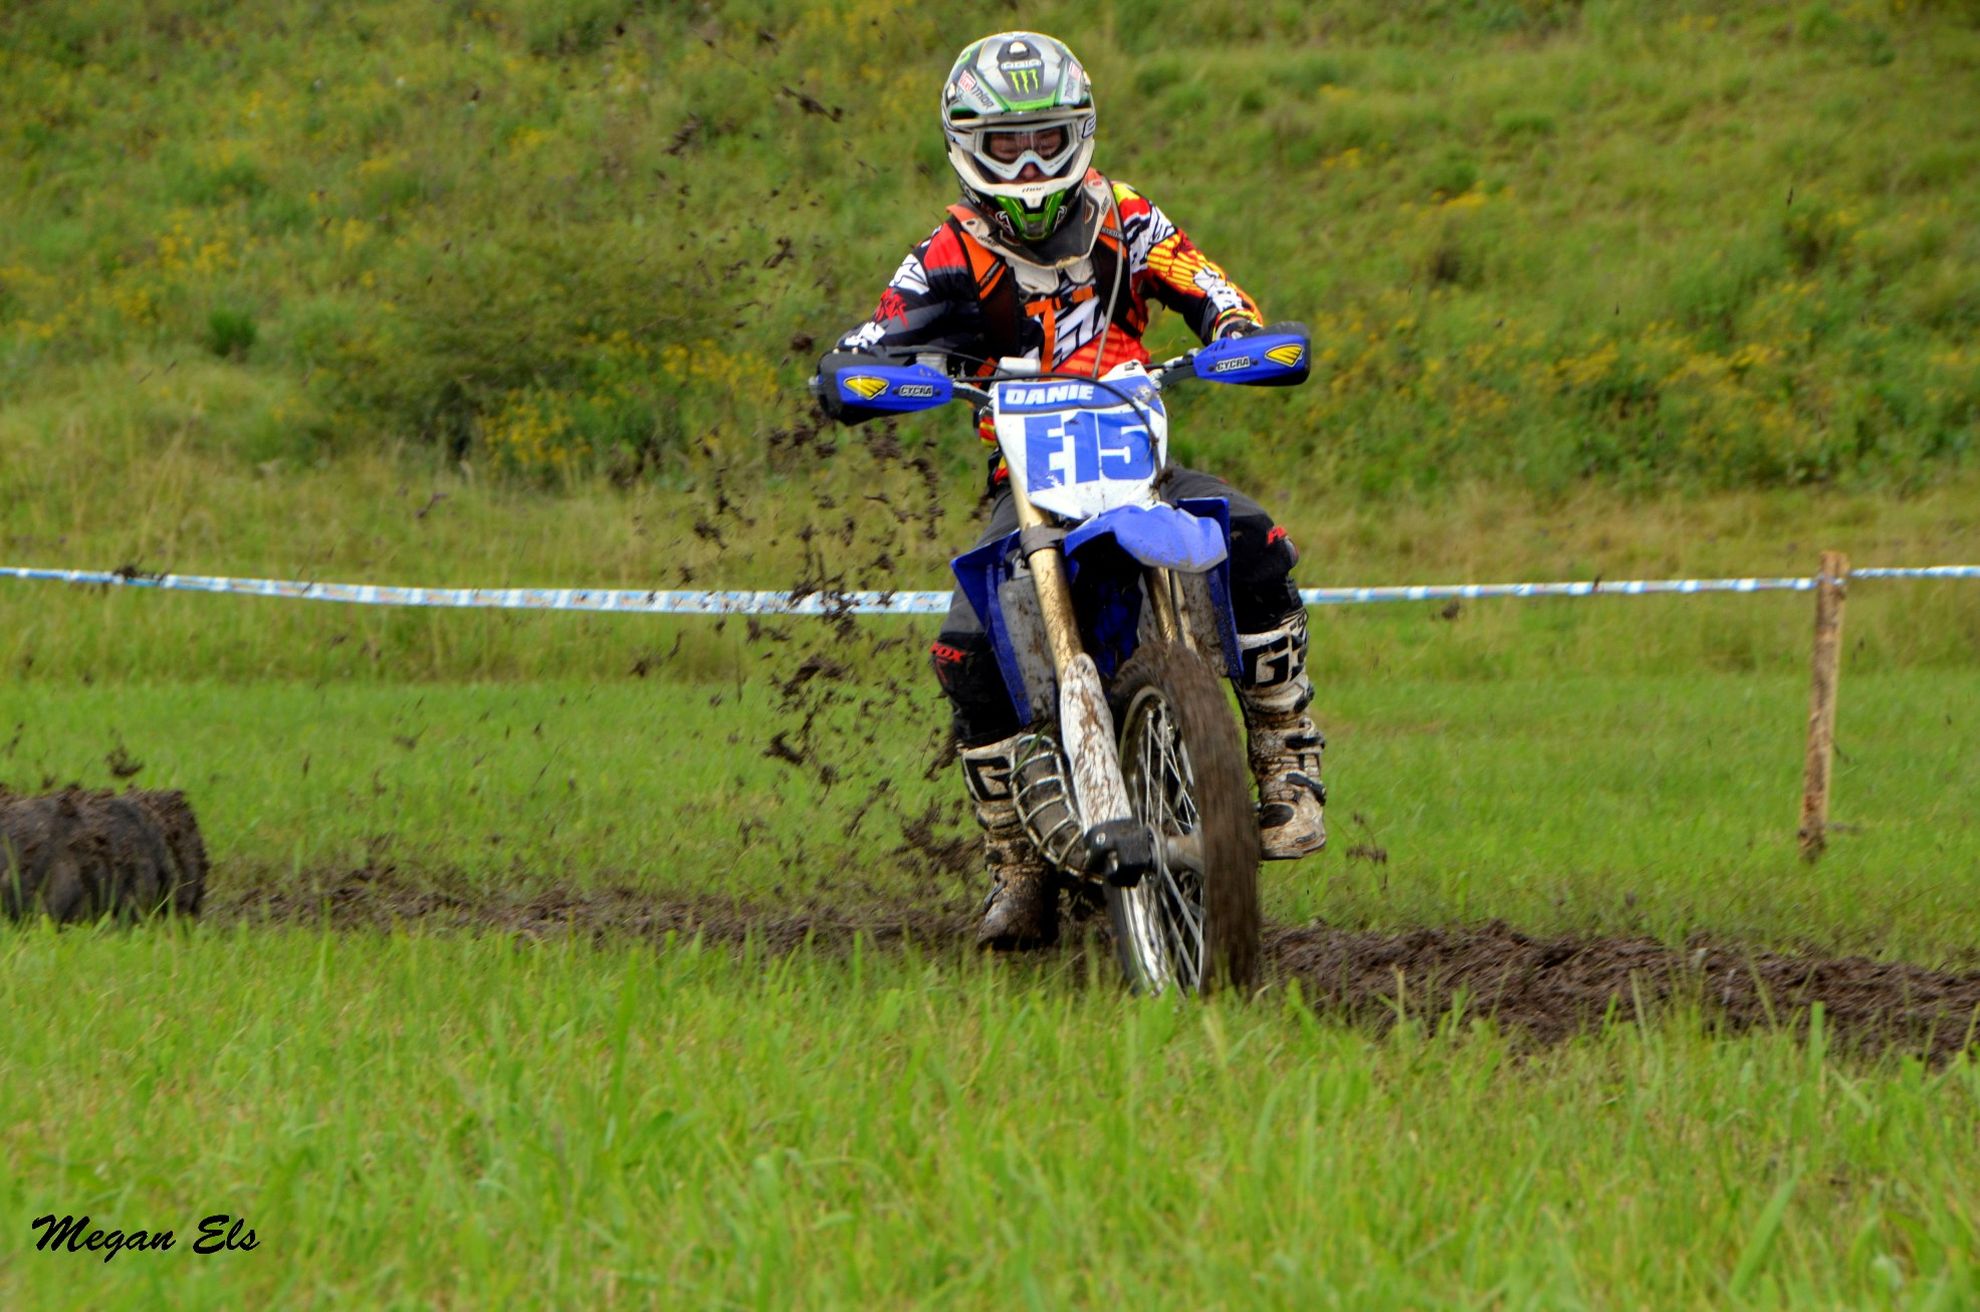 BATTLES TO CONTINUE AS NATIONAL ENDURO MOTORCYCLE CHAMPIONSHIP REACHES HALFWAY MARK